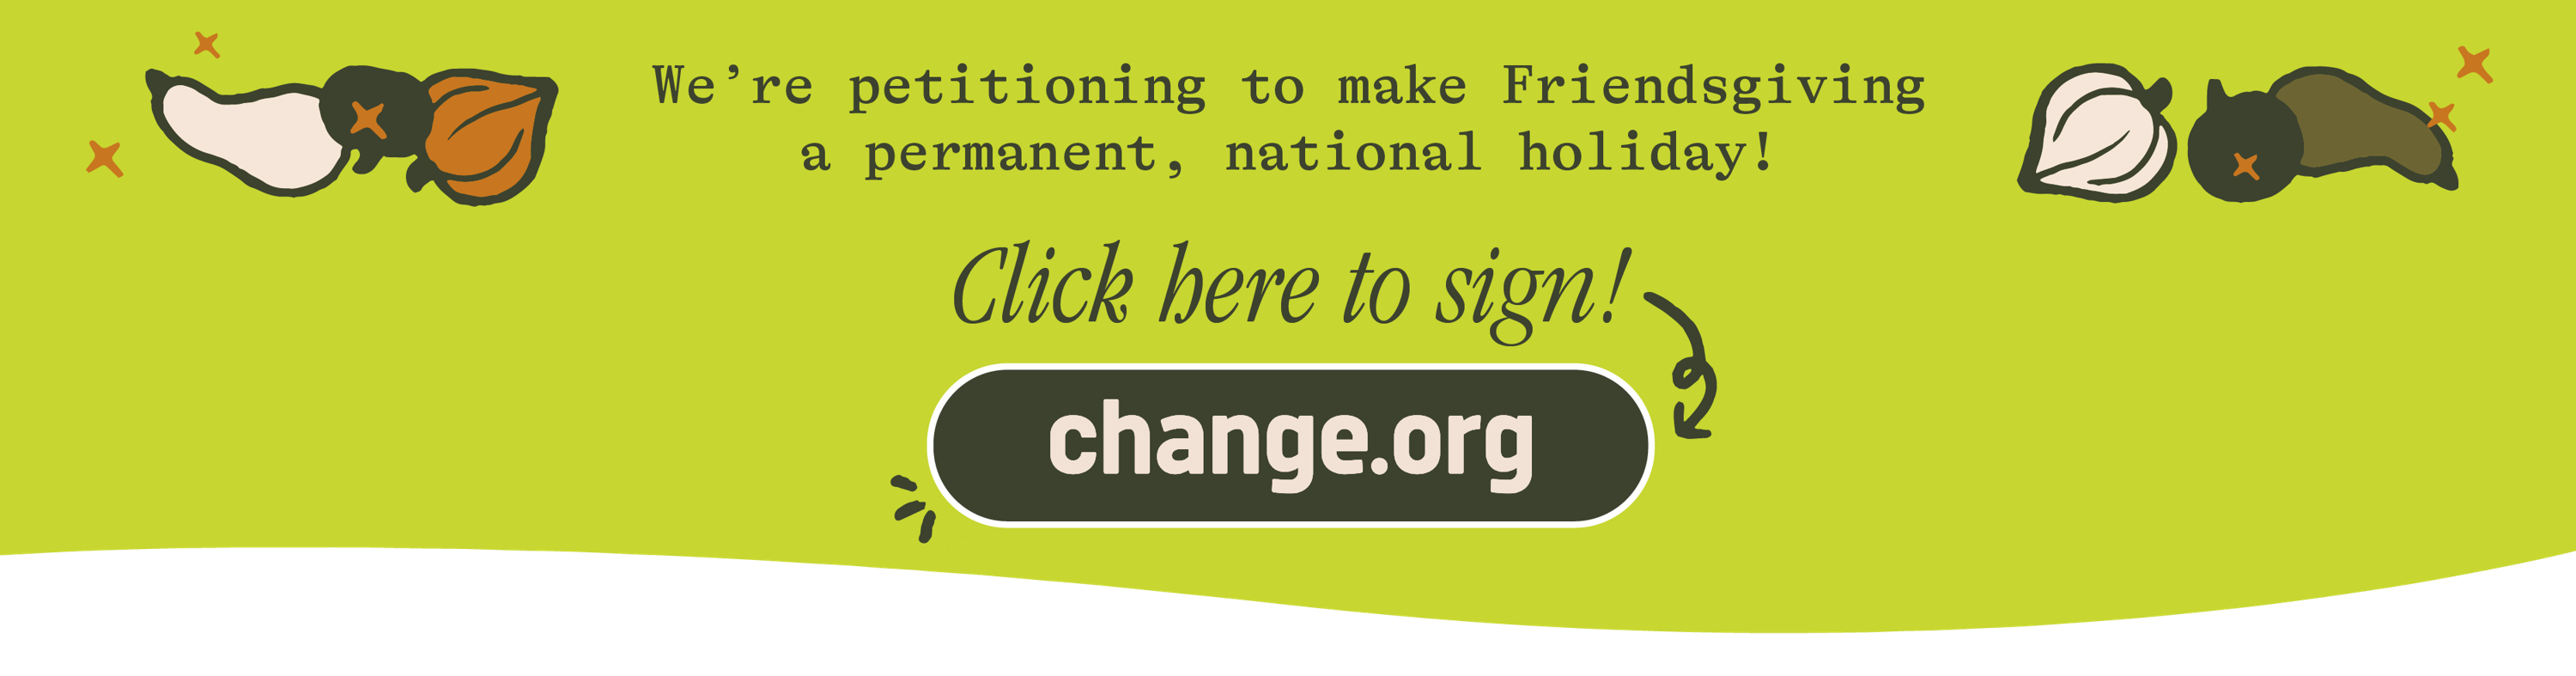 We're petitioning to make Friendsgiving a permanent, national holiday! Click here to sign! change.org